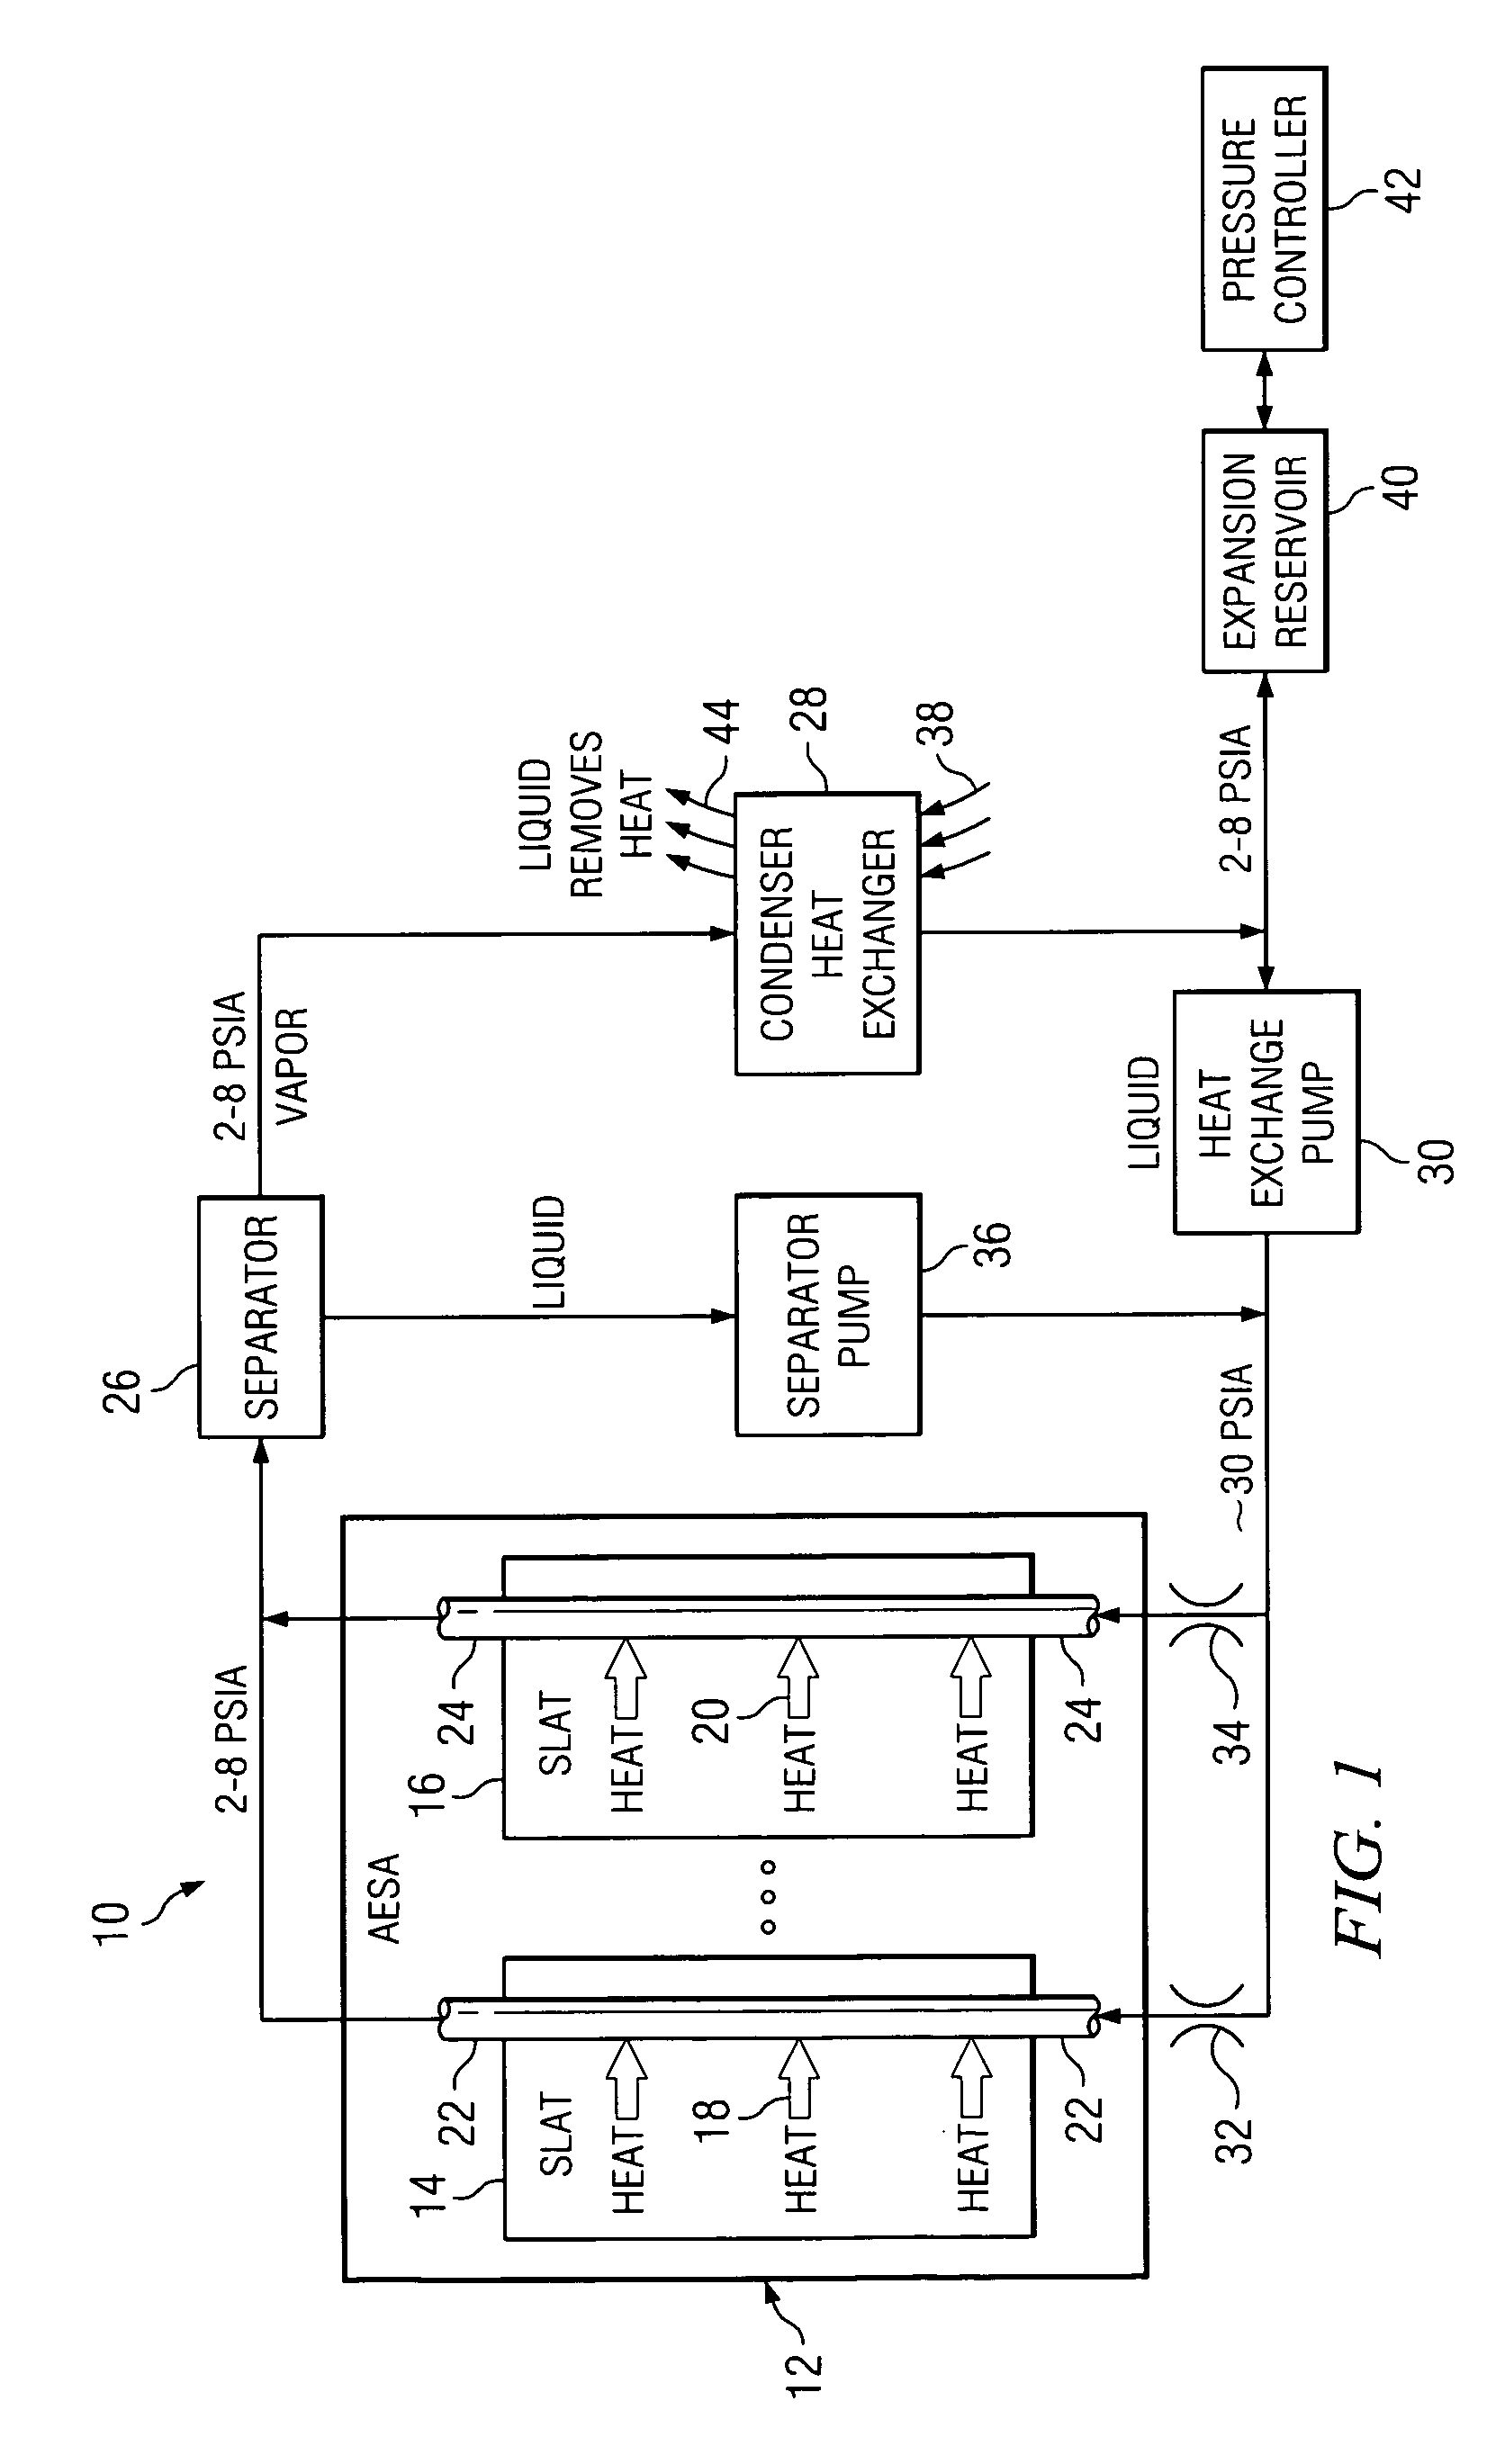 Method and apparatus for cooling with coolant at a subambient pressure